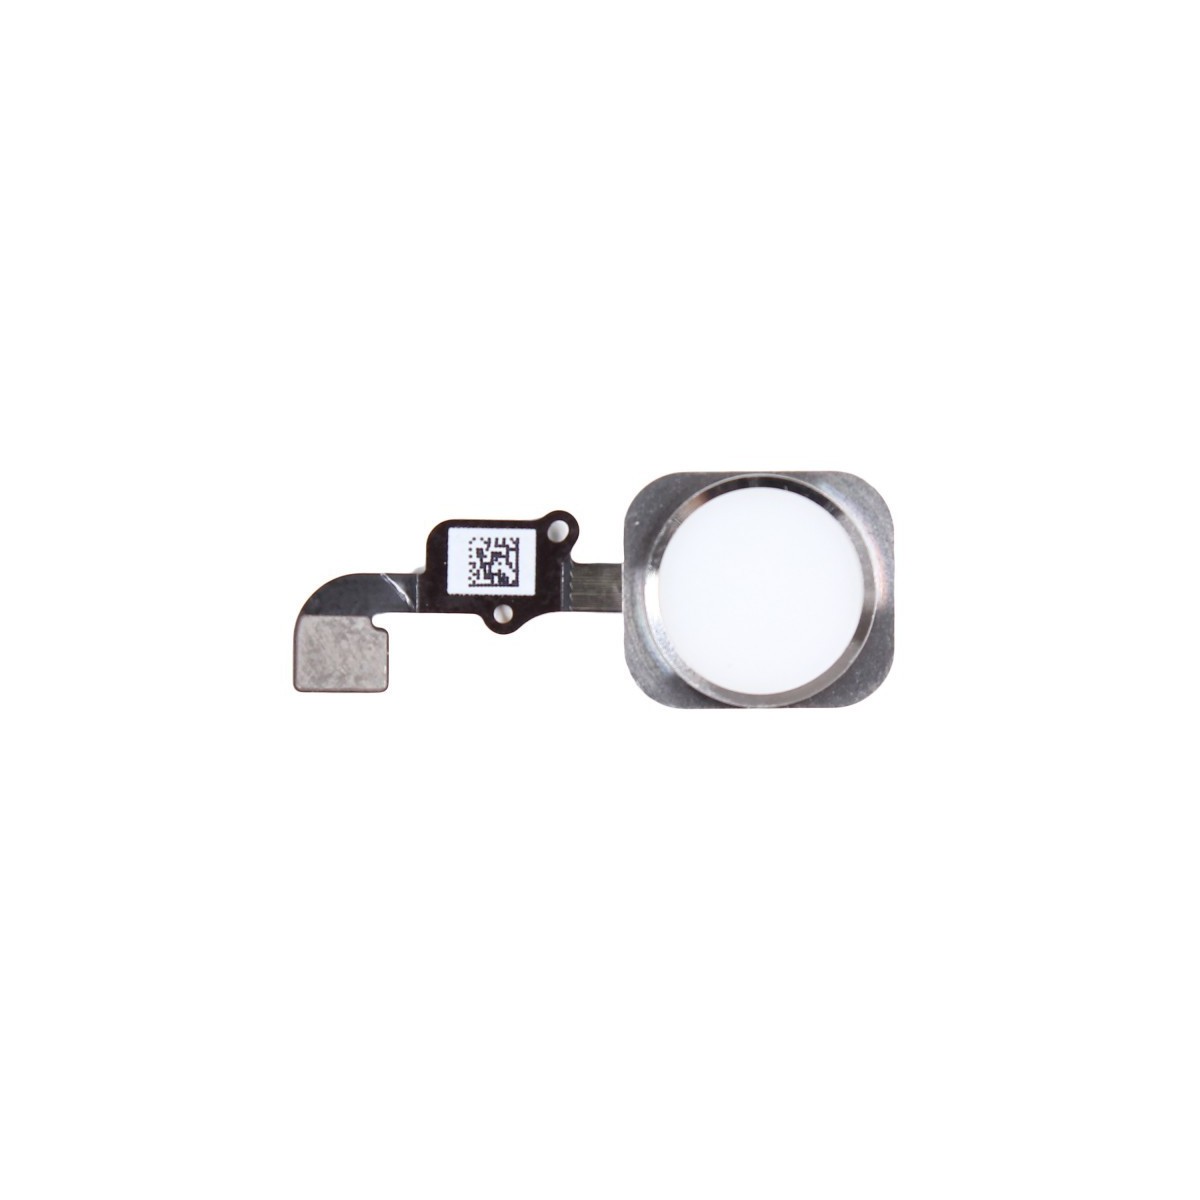 Bouton home blanc-argent + nappe - iPhone 6S